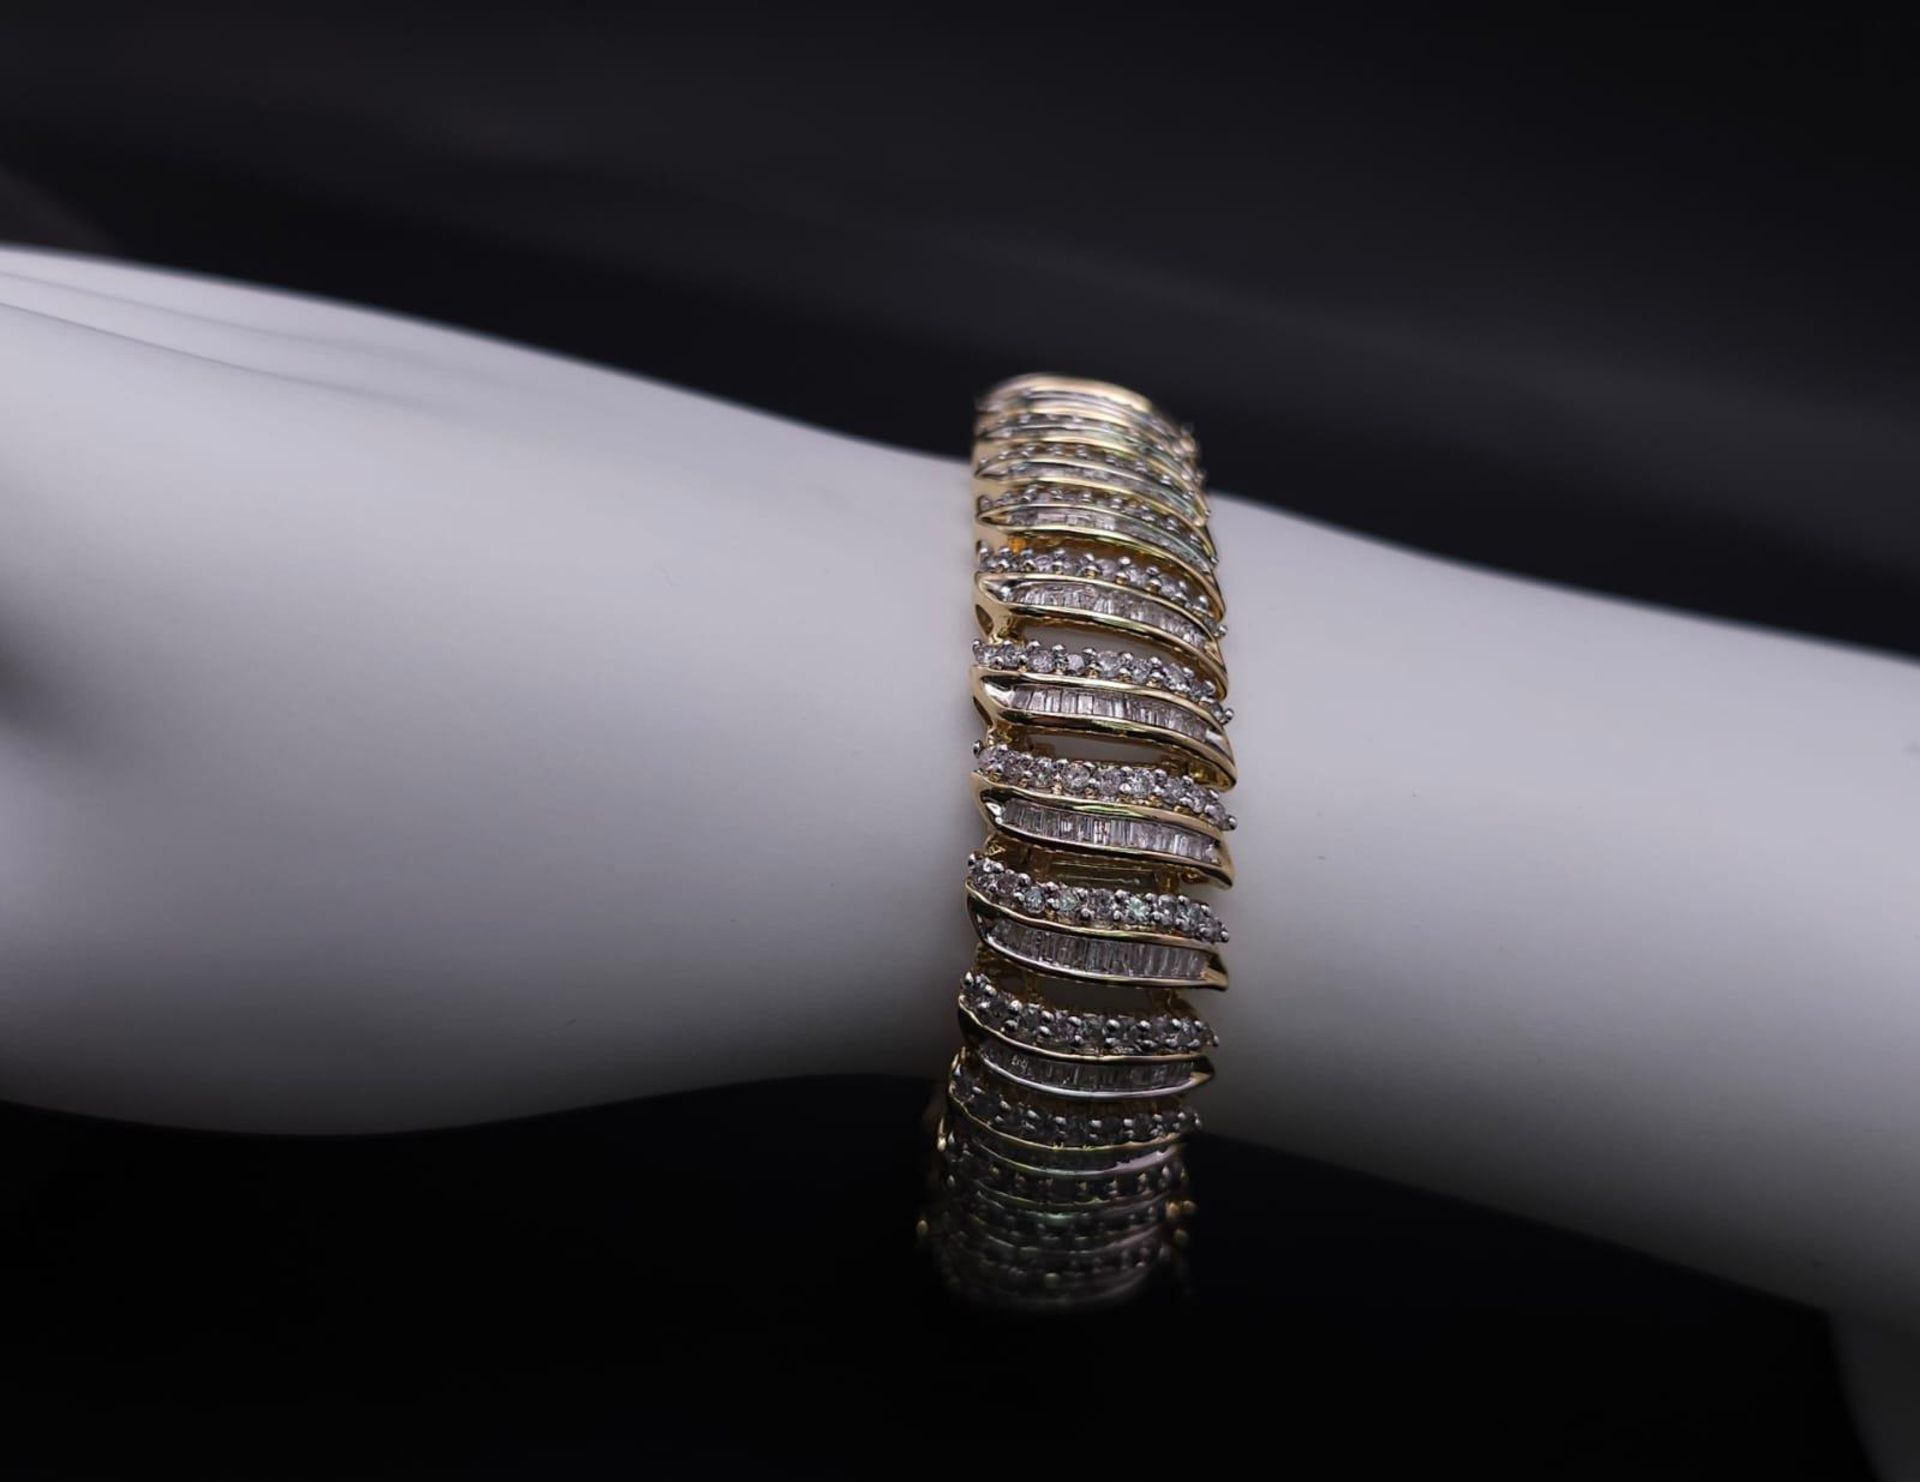 A BEAUTIFUL HEAD-TURNING 14K YELLOW GOLD DIAMOND TENNIS BRACELET WITH A MIXTURE OF ROUND AND - Image 10 of 10